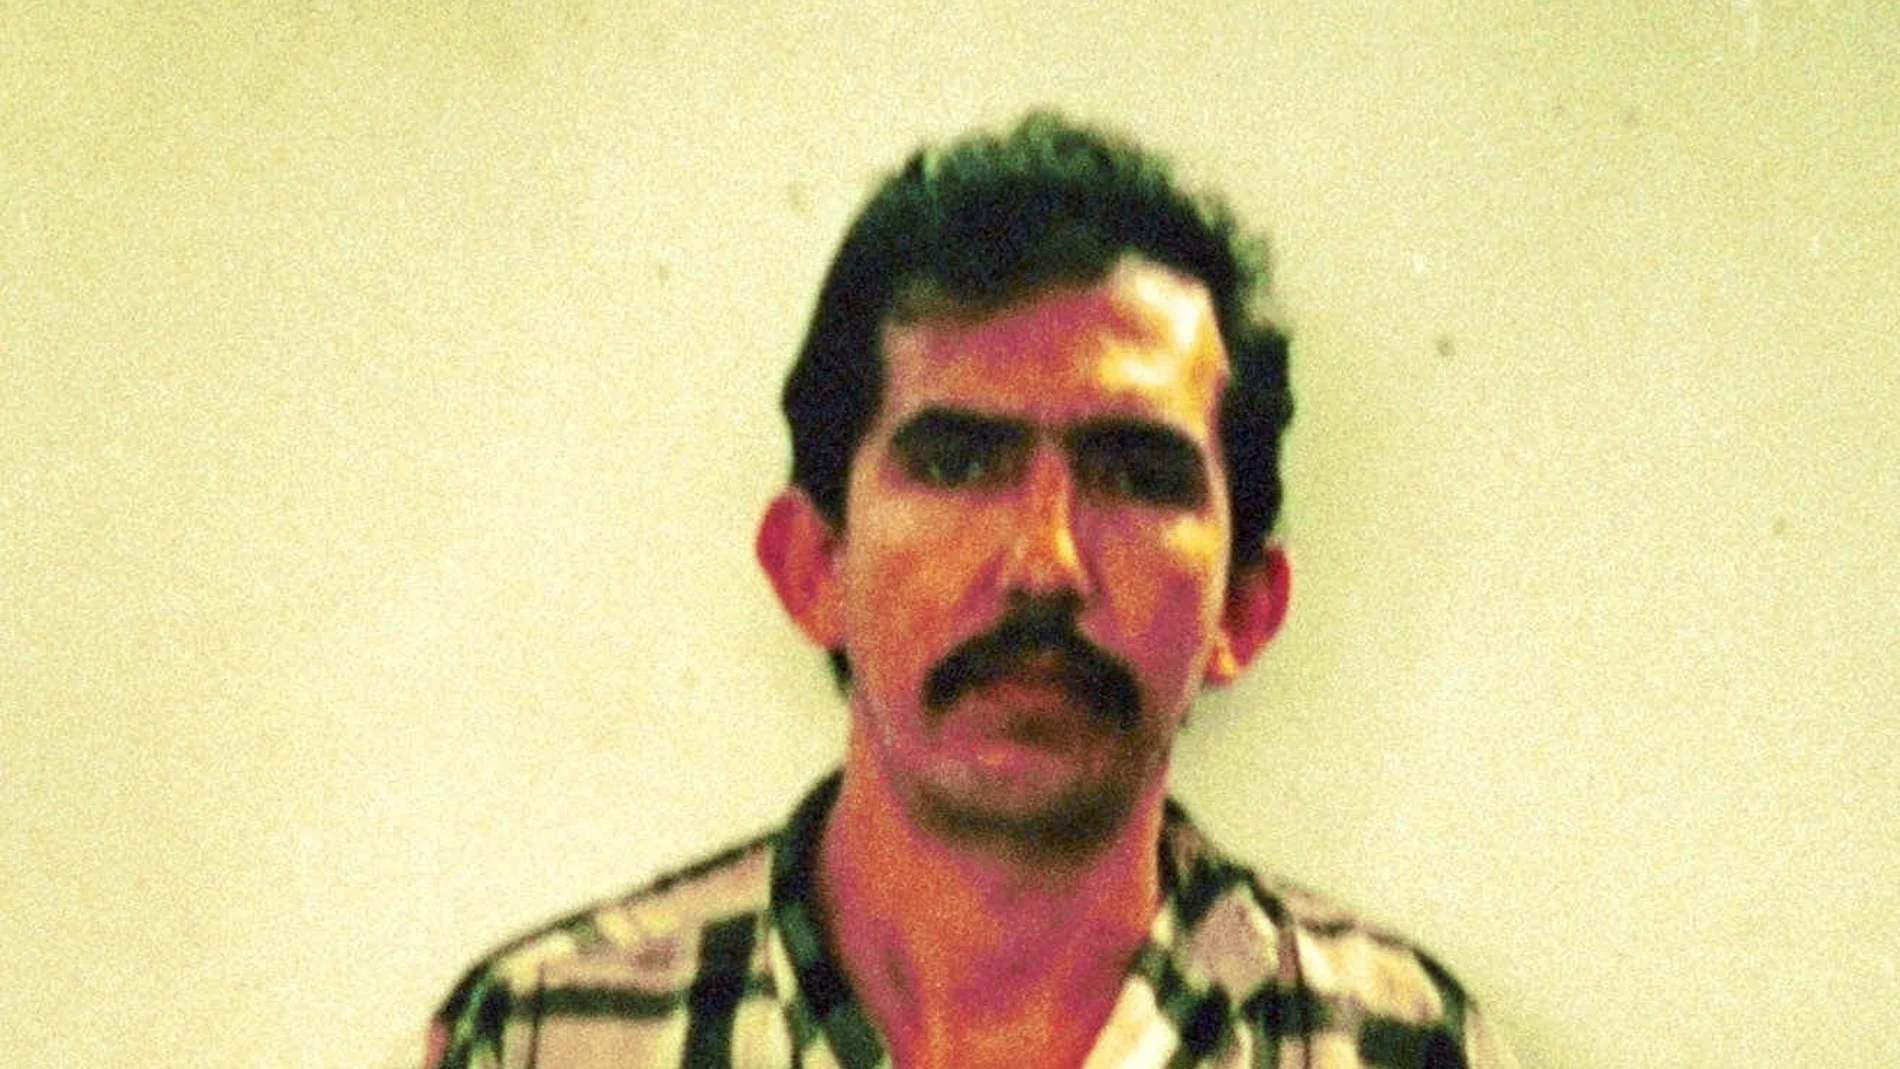 FILE - In this photo released by Colombian police, Luis Alfredo Garavito is seen in this undated police mug shot in Bogota, Colombia. A proposal to grant early release from prison to Garavito, one of the world's most prolific serial killers who confessed to killing about 190 children, has raised outrage in Colombia and a denunciation on Monday, Nov. 1, 2021 from President IvÃ¡n Duque. (Colombia Police via AP, File)